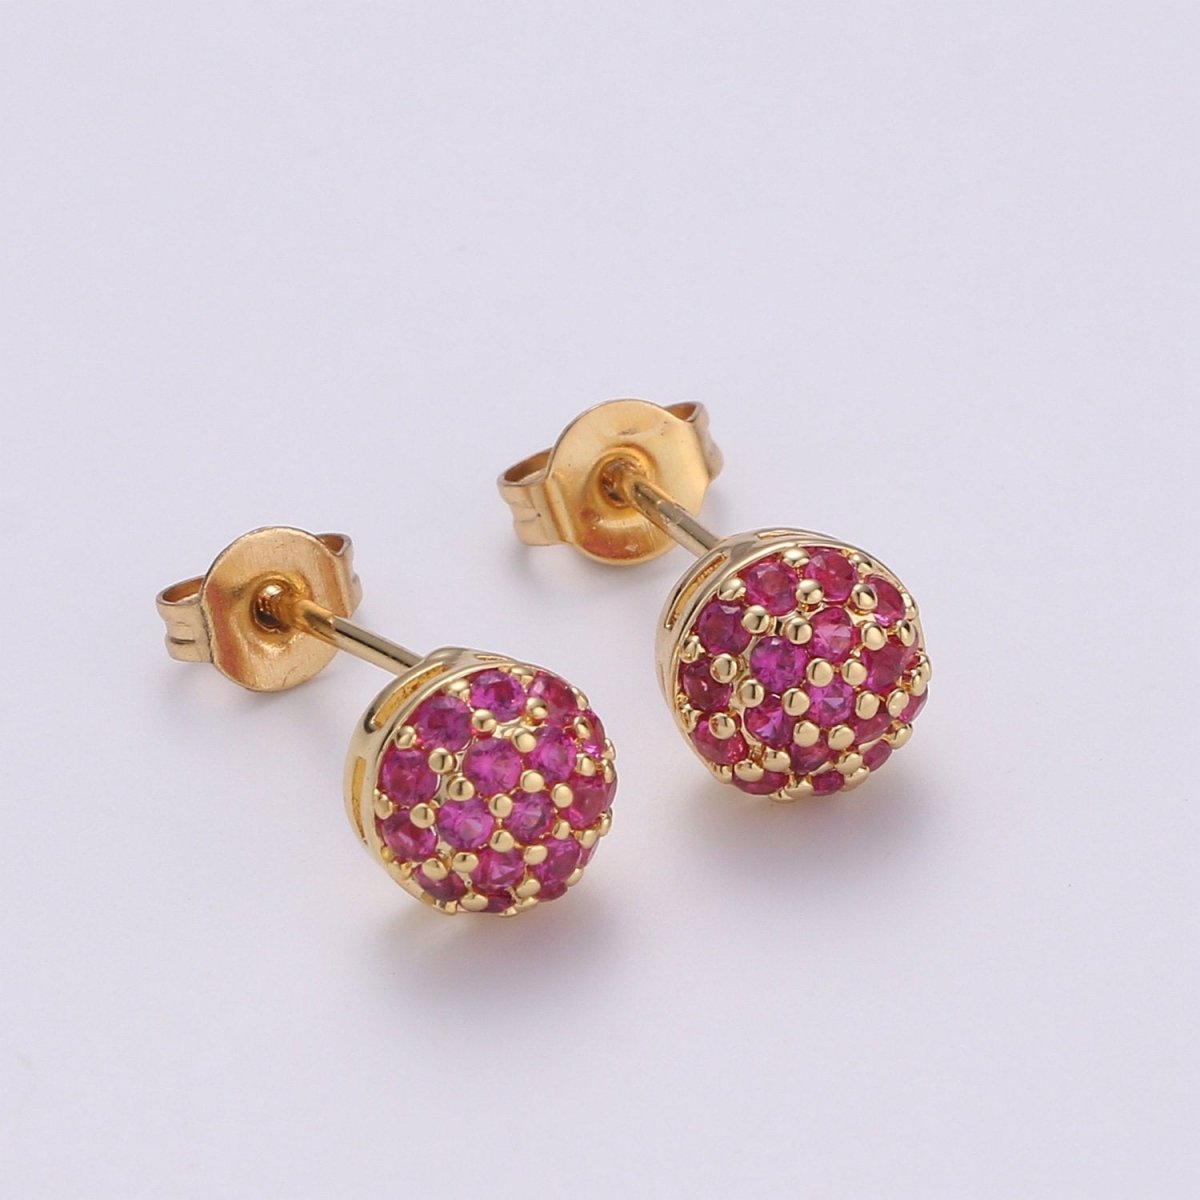 Gold Ball Stud Earrings Set, 14k Gold Plated Sterling Silver Hypoallergenic Jewelry Micro Pave Fuschia Stud Q-259 - DLUXCA